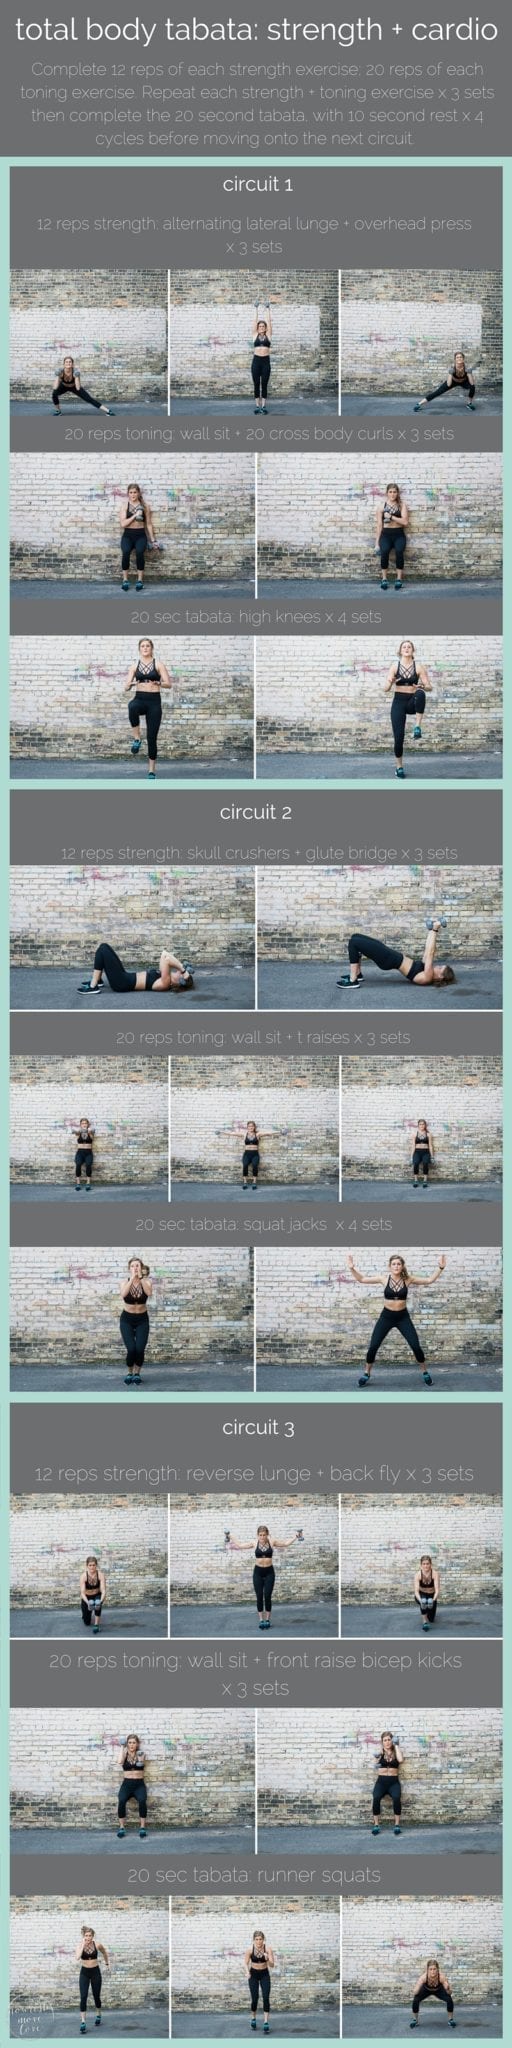 total body tabata with dumbbells {cardio + strength} | ready to test your cardiovascular stamina? combine dumbbell strength training with cardio intervals in this tri-circuit, total body tabata workout. | www.nourishmovelove.com